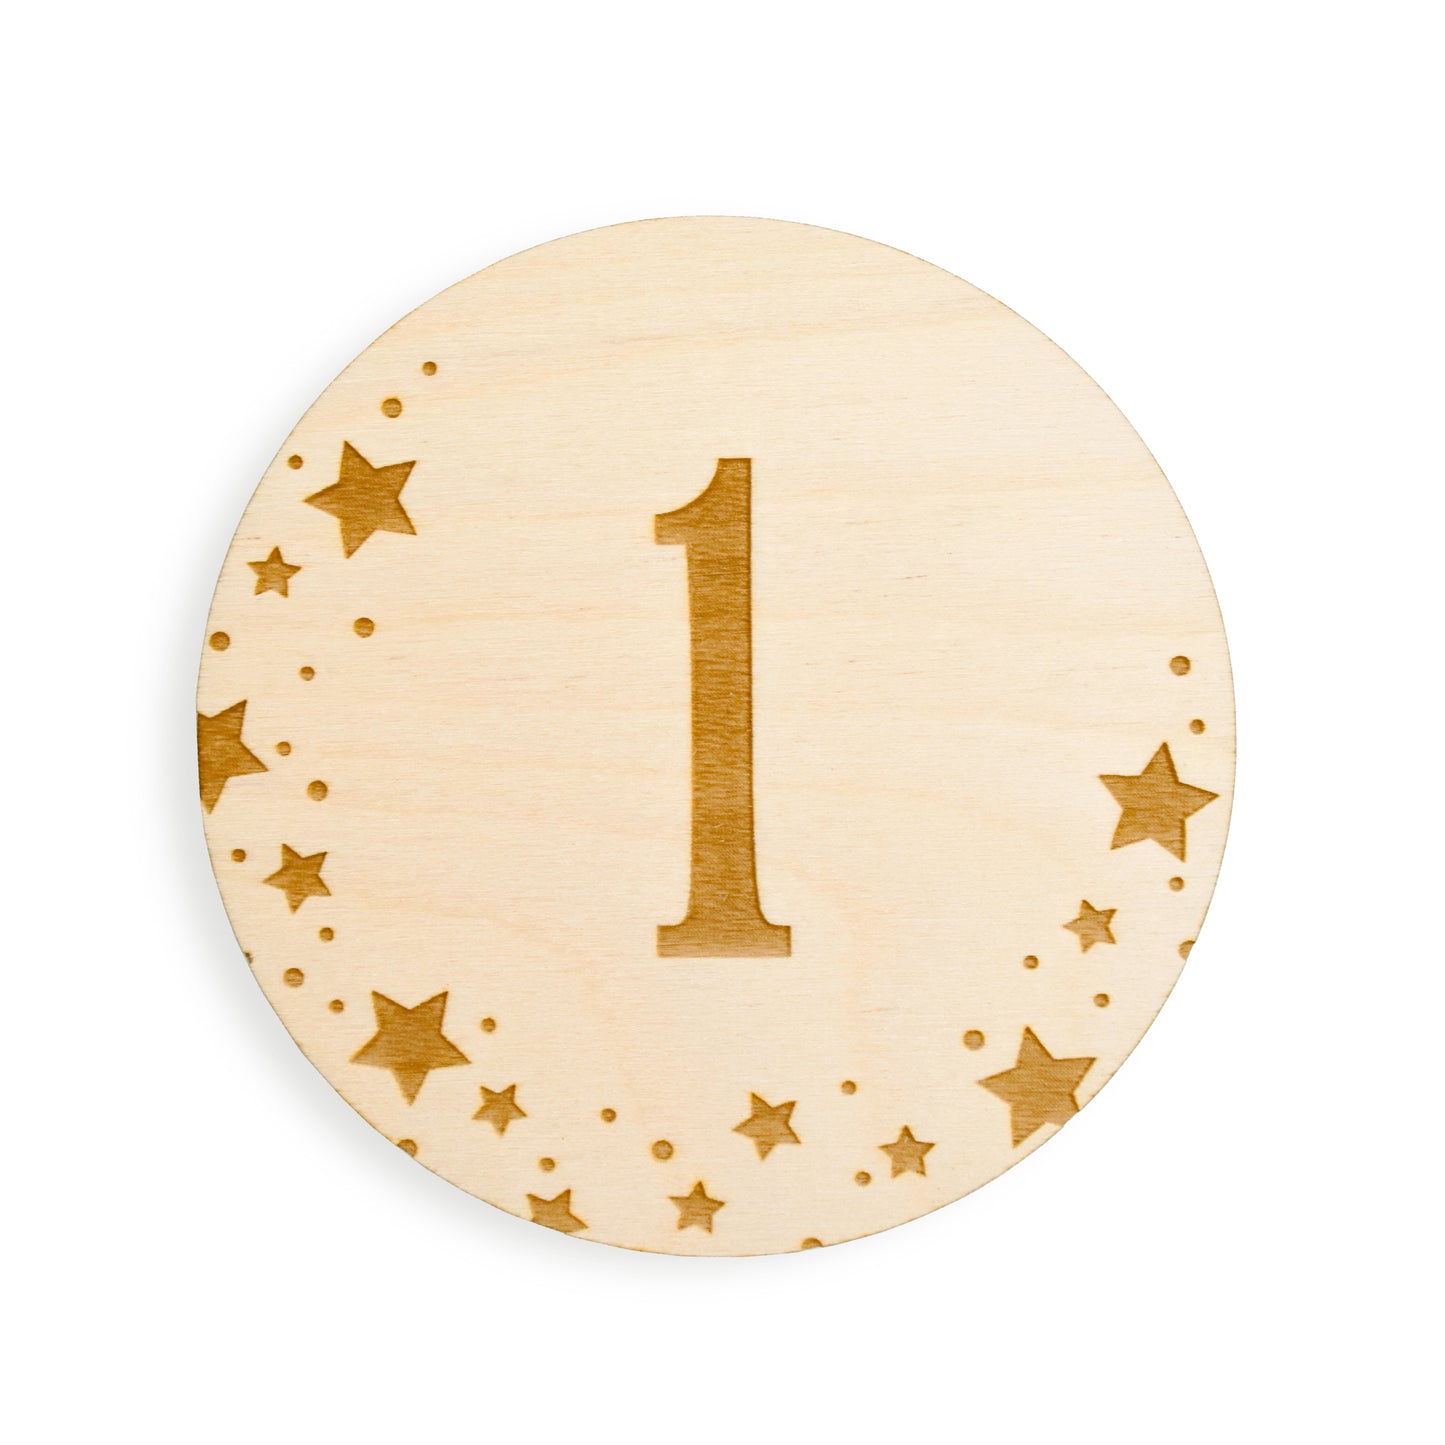 number 1 sign for starry dreams monthly milestone set of 12 discs gift village baby